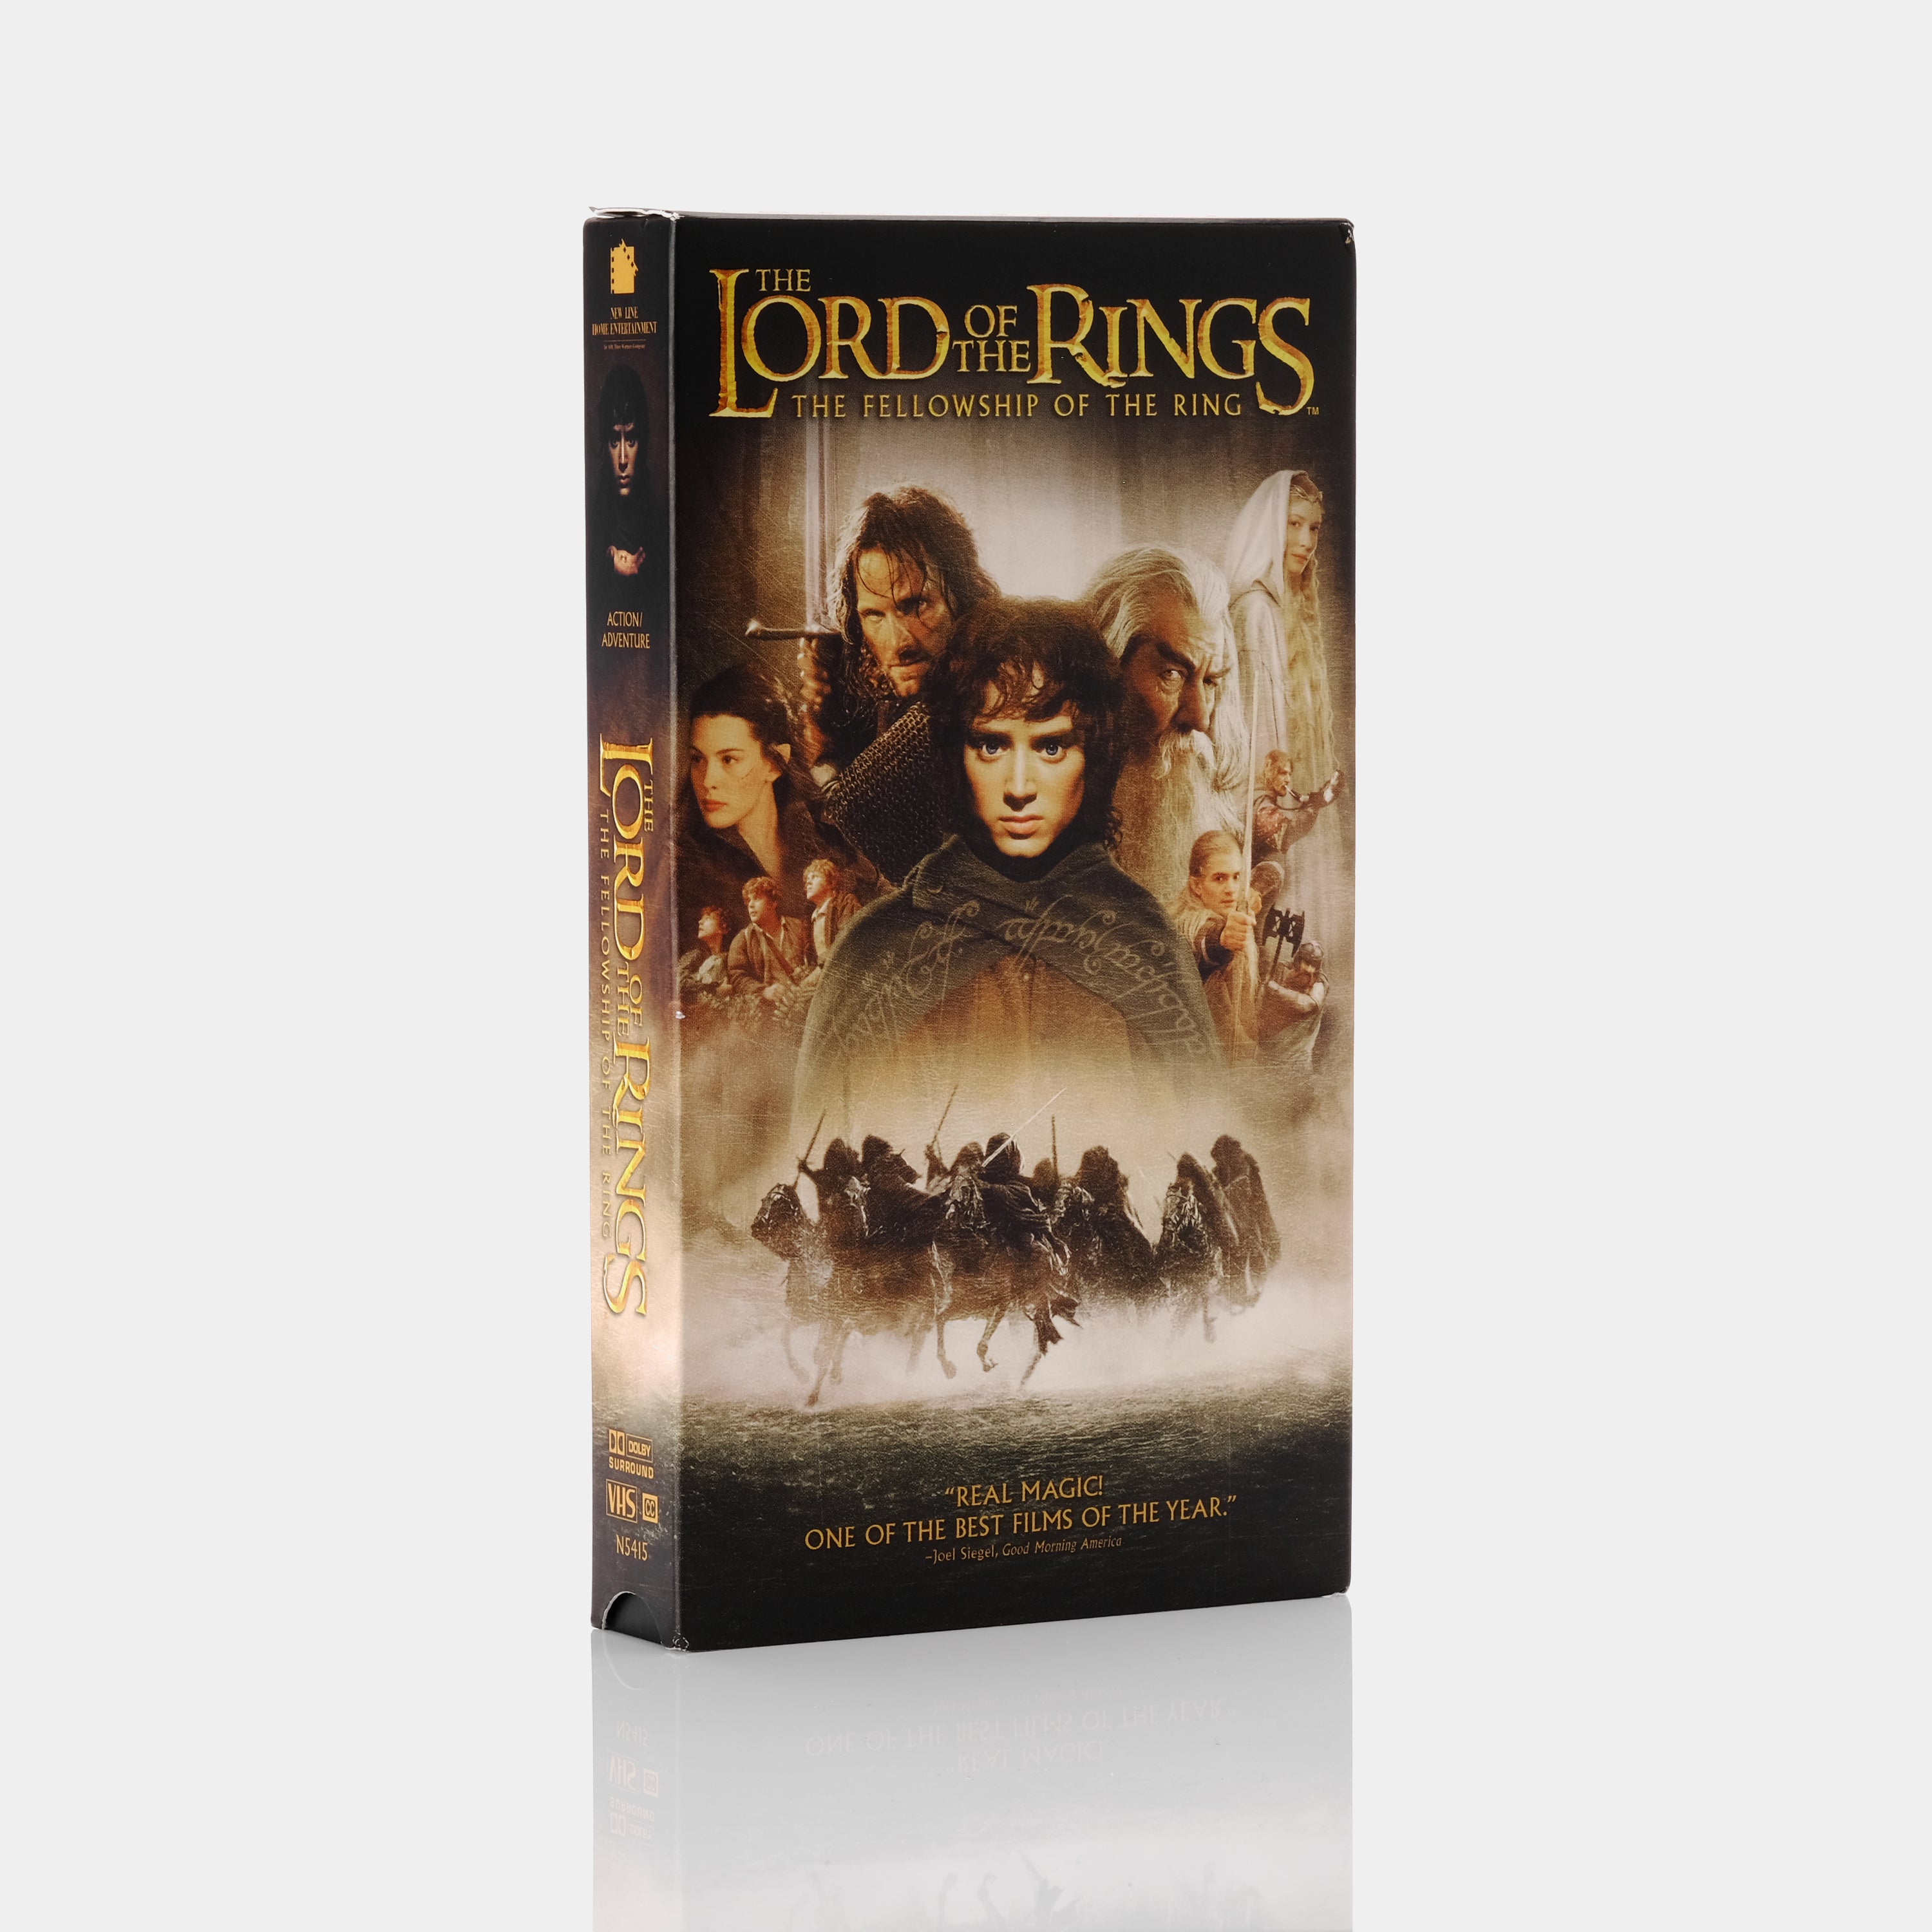 The Lord Of The Rings: The Fellowship Of The Ring VHS Tape